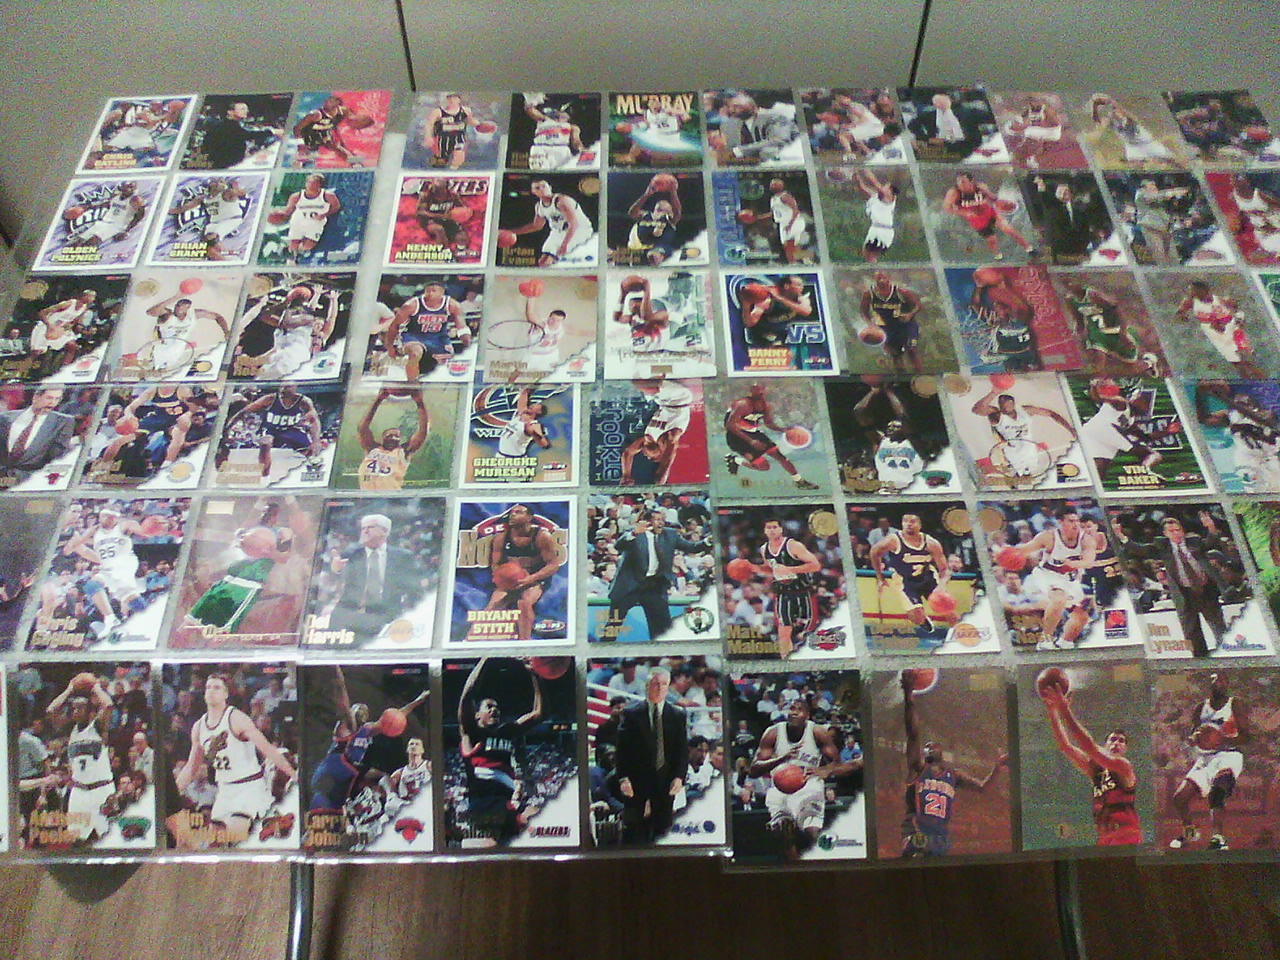 NICE EXCITING LOT OF 99 TRADING CARDS MLB BASEBALL MANY FAMOUS PLAYERS & TEAMS Без бренда